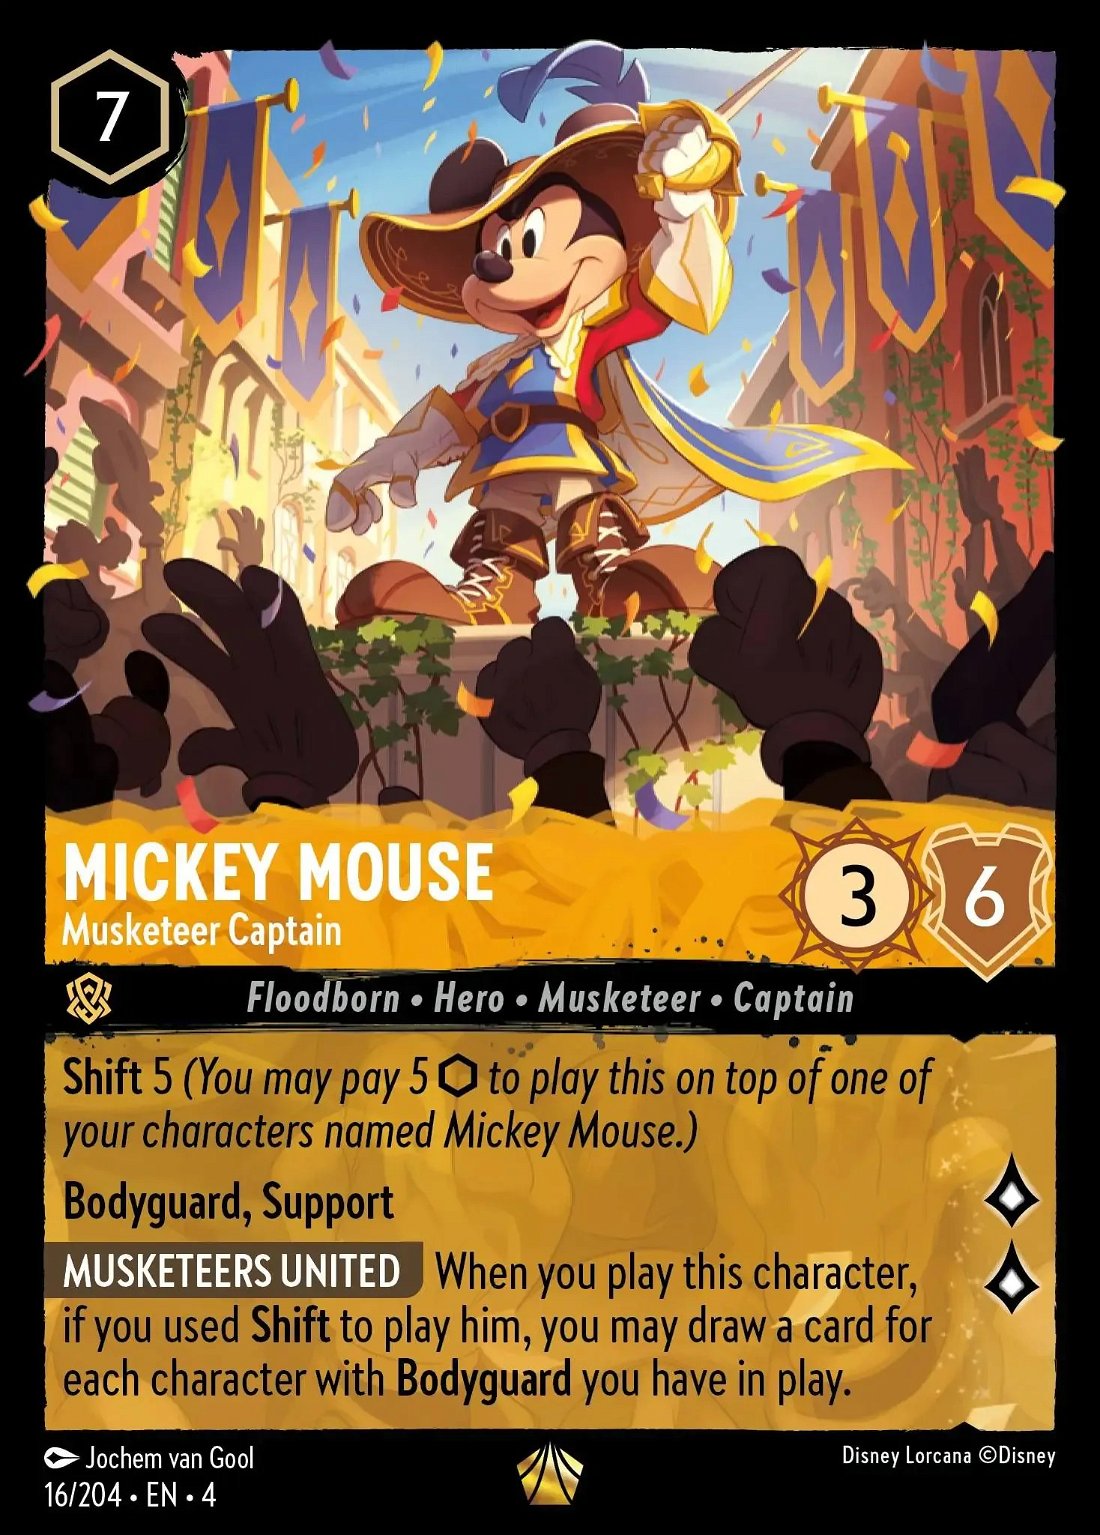 Mickey Mouse - Musketeer Captain Crop image Wallpaper